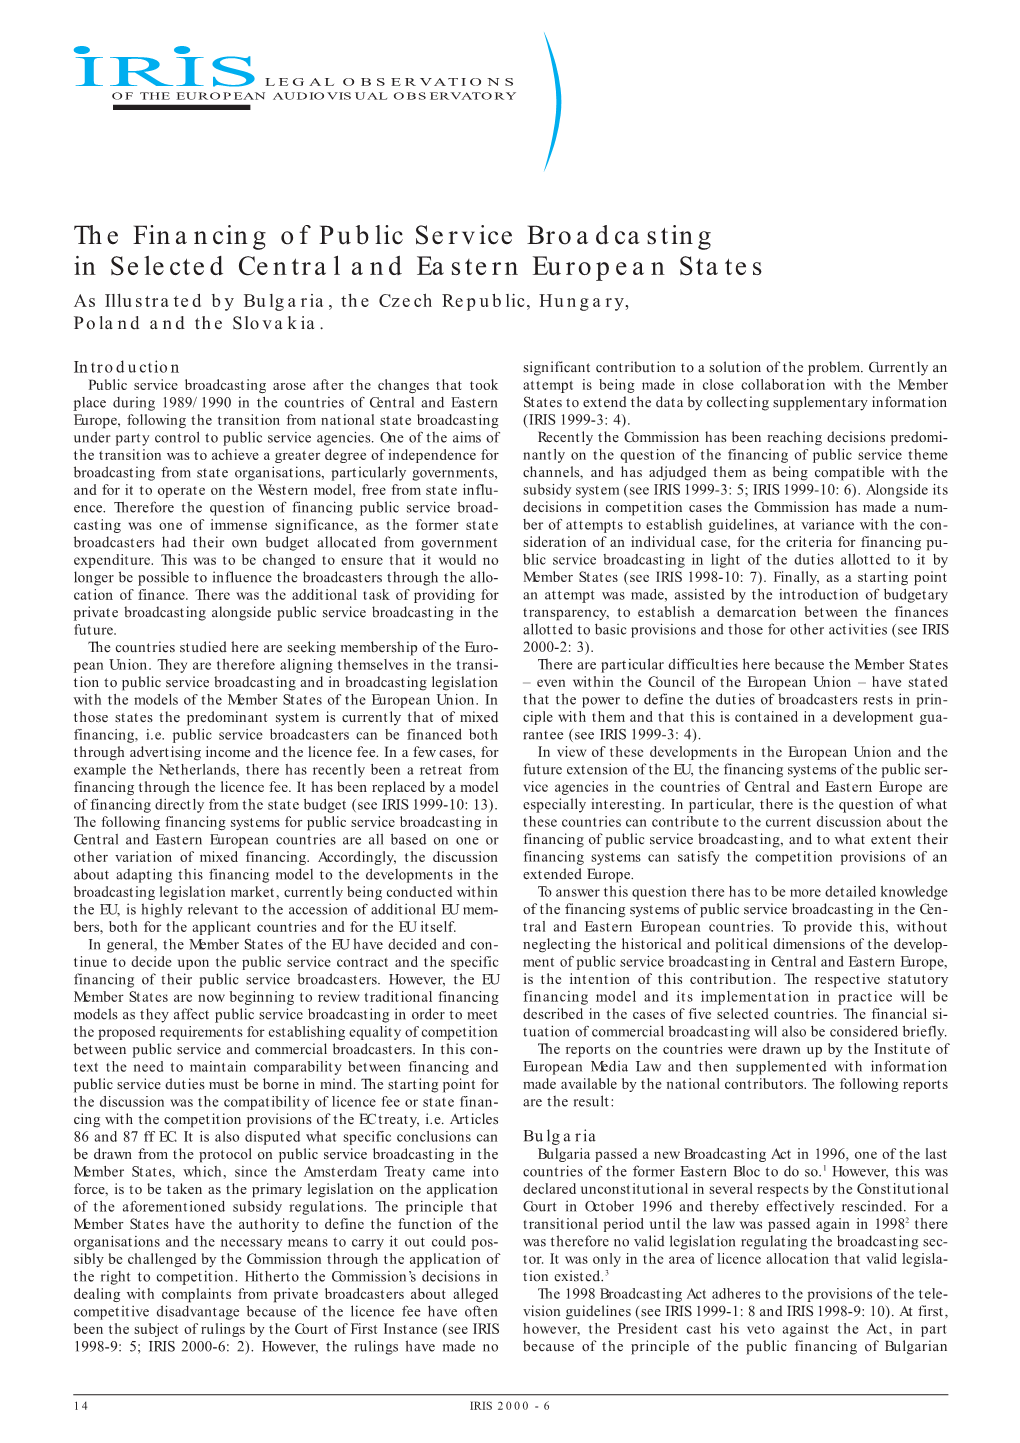 The Financing of Public Service Broadcasting in Selected Central and Eastern European